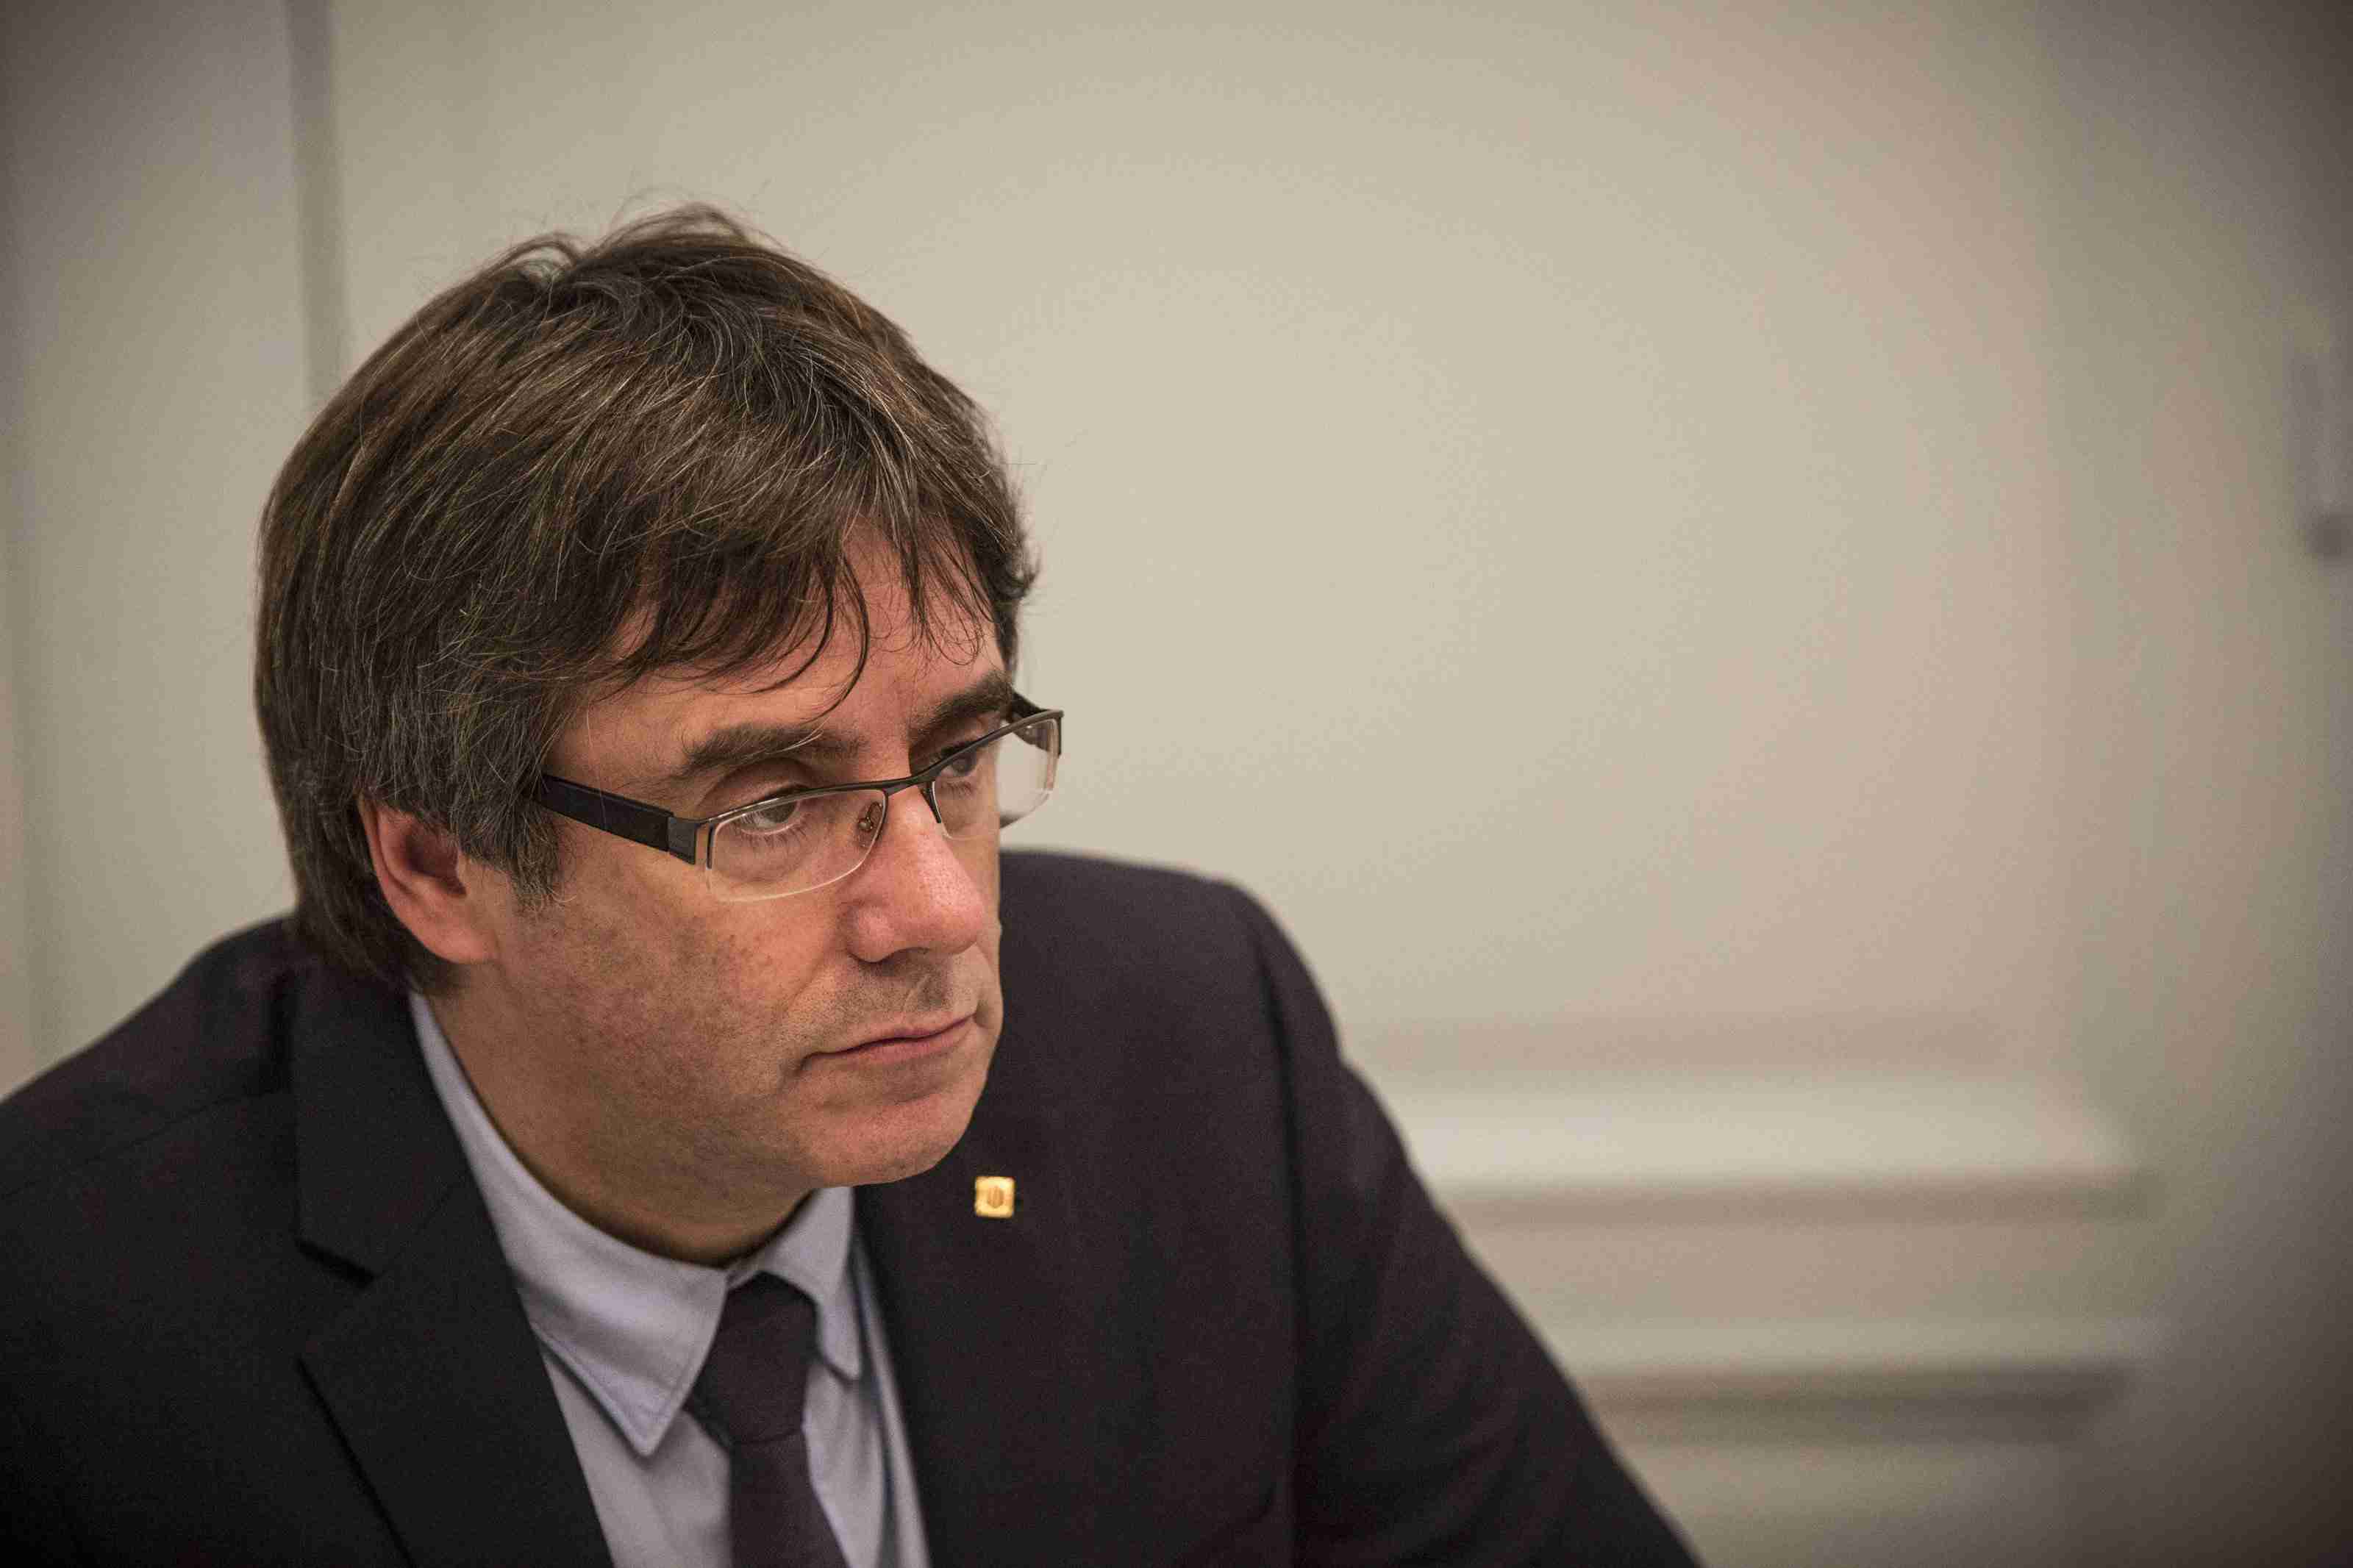 "In Geneva, we'll speak loud and clear," says Puigdemont, defying arrest threats